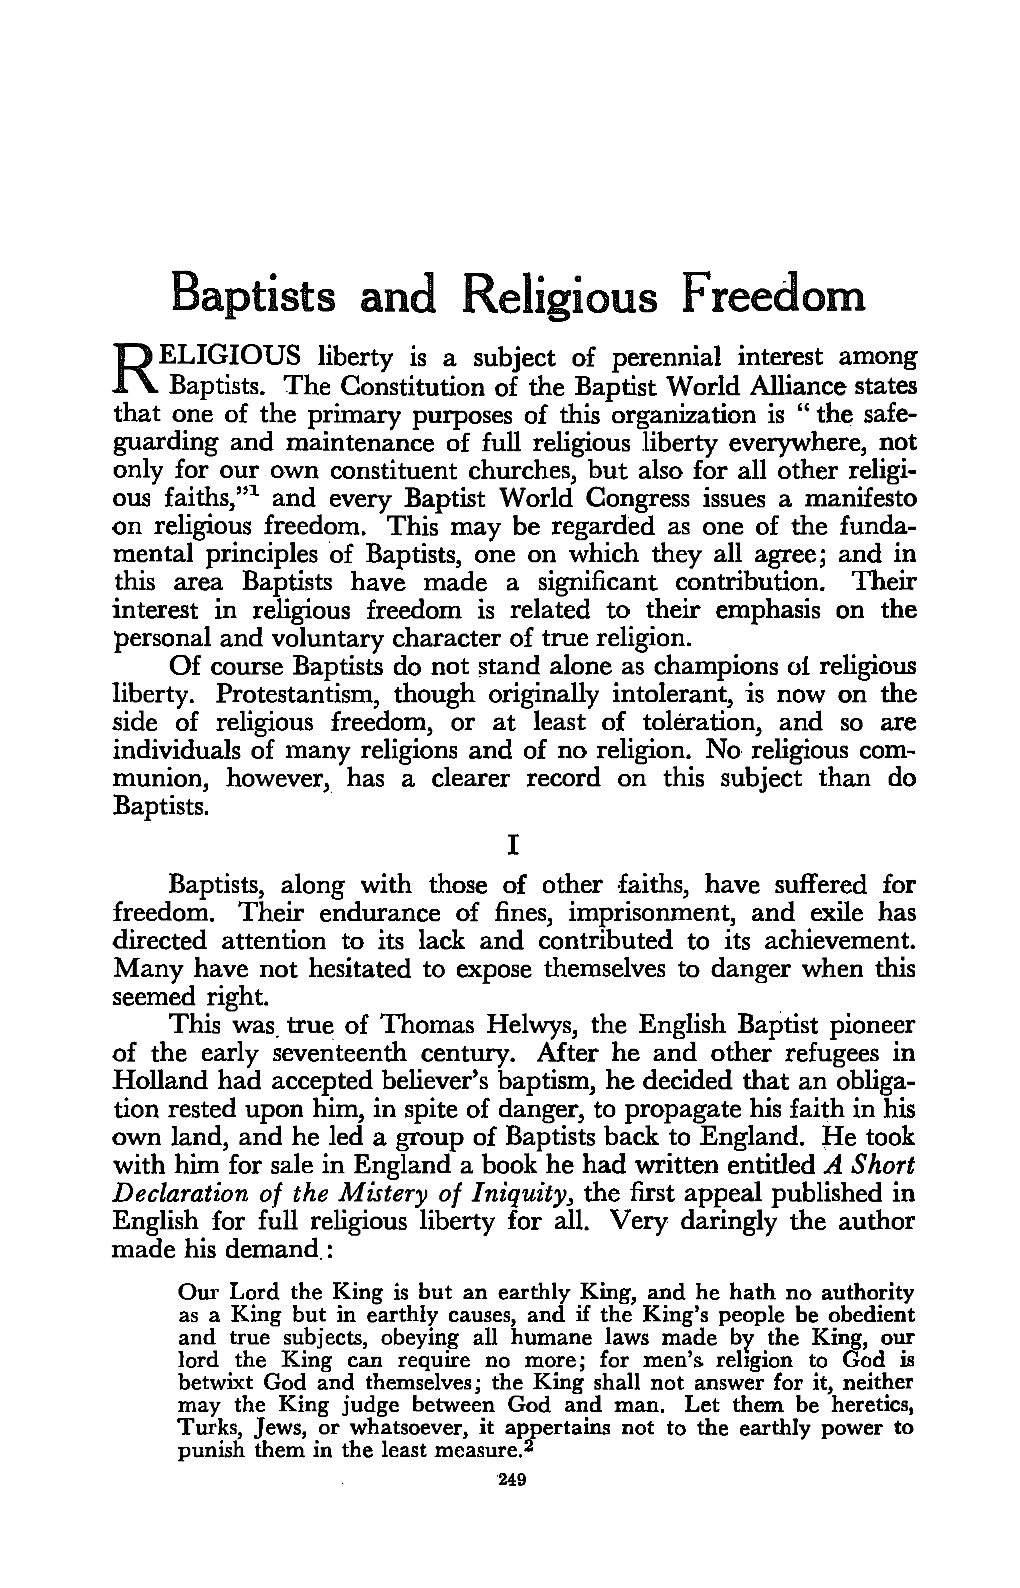 Baptists and Religious Freedom ELIGIOUS Liberty Is a Subject of Perennial Interest Among R Baptists